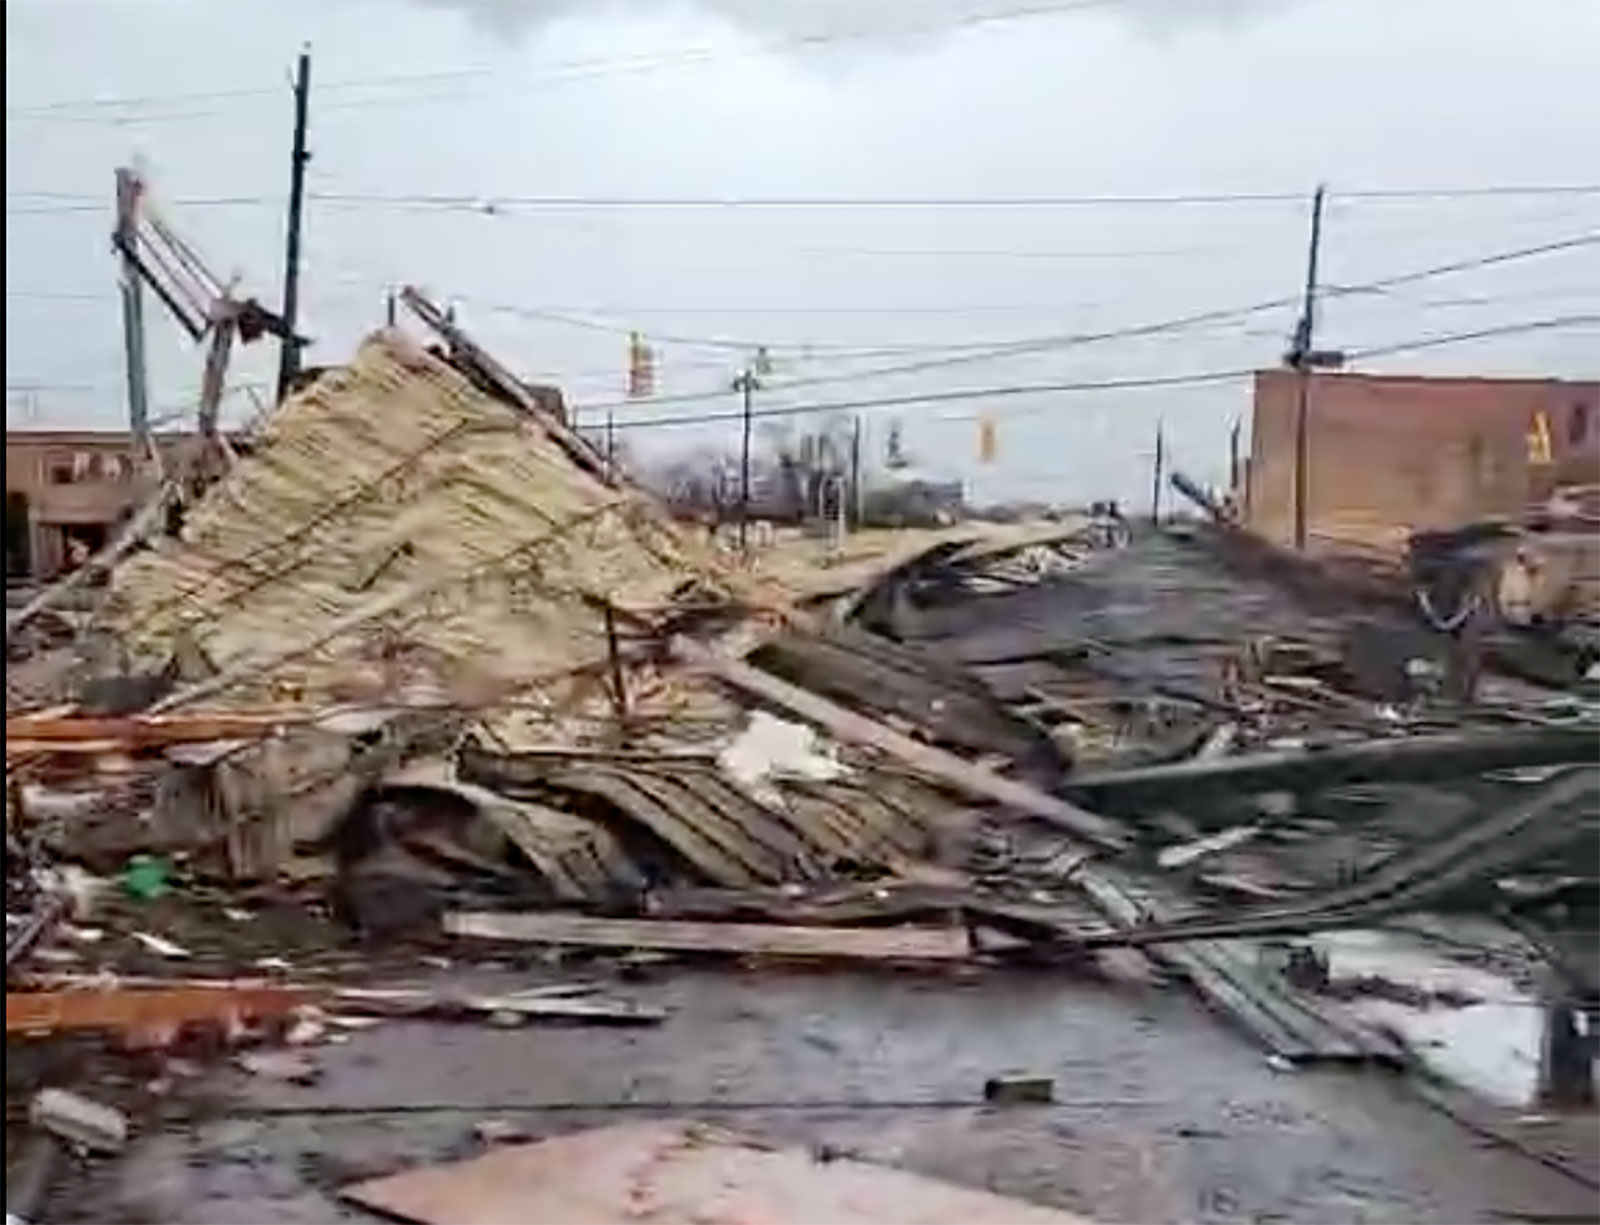 'This is a disaster area': A curfew goes into effect at dusk as Selma officials continue assessing the damage